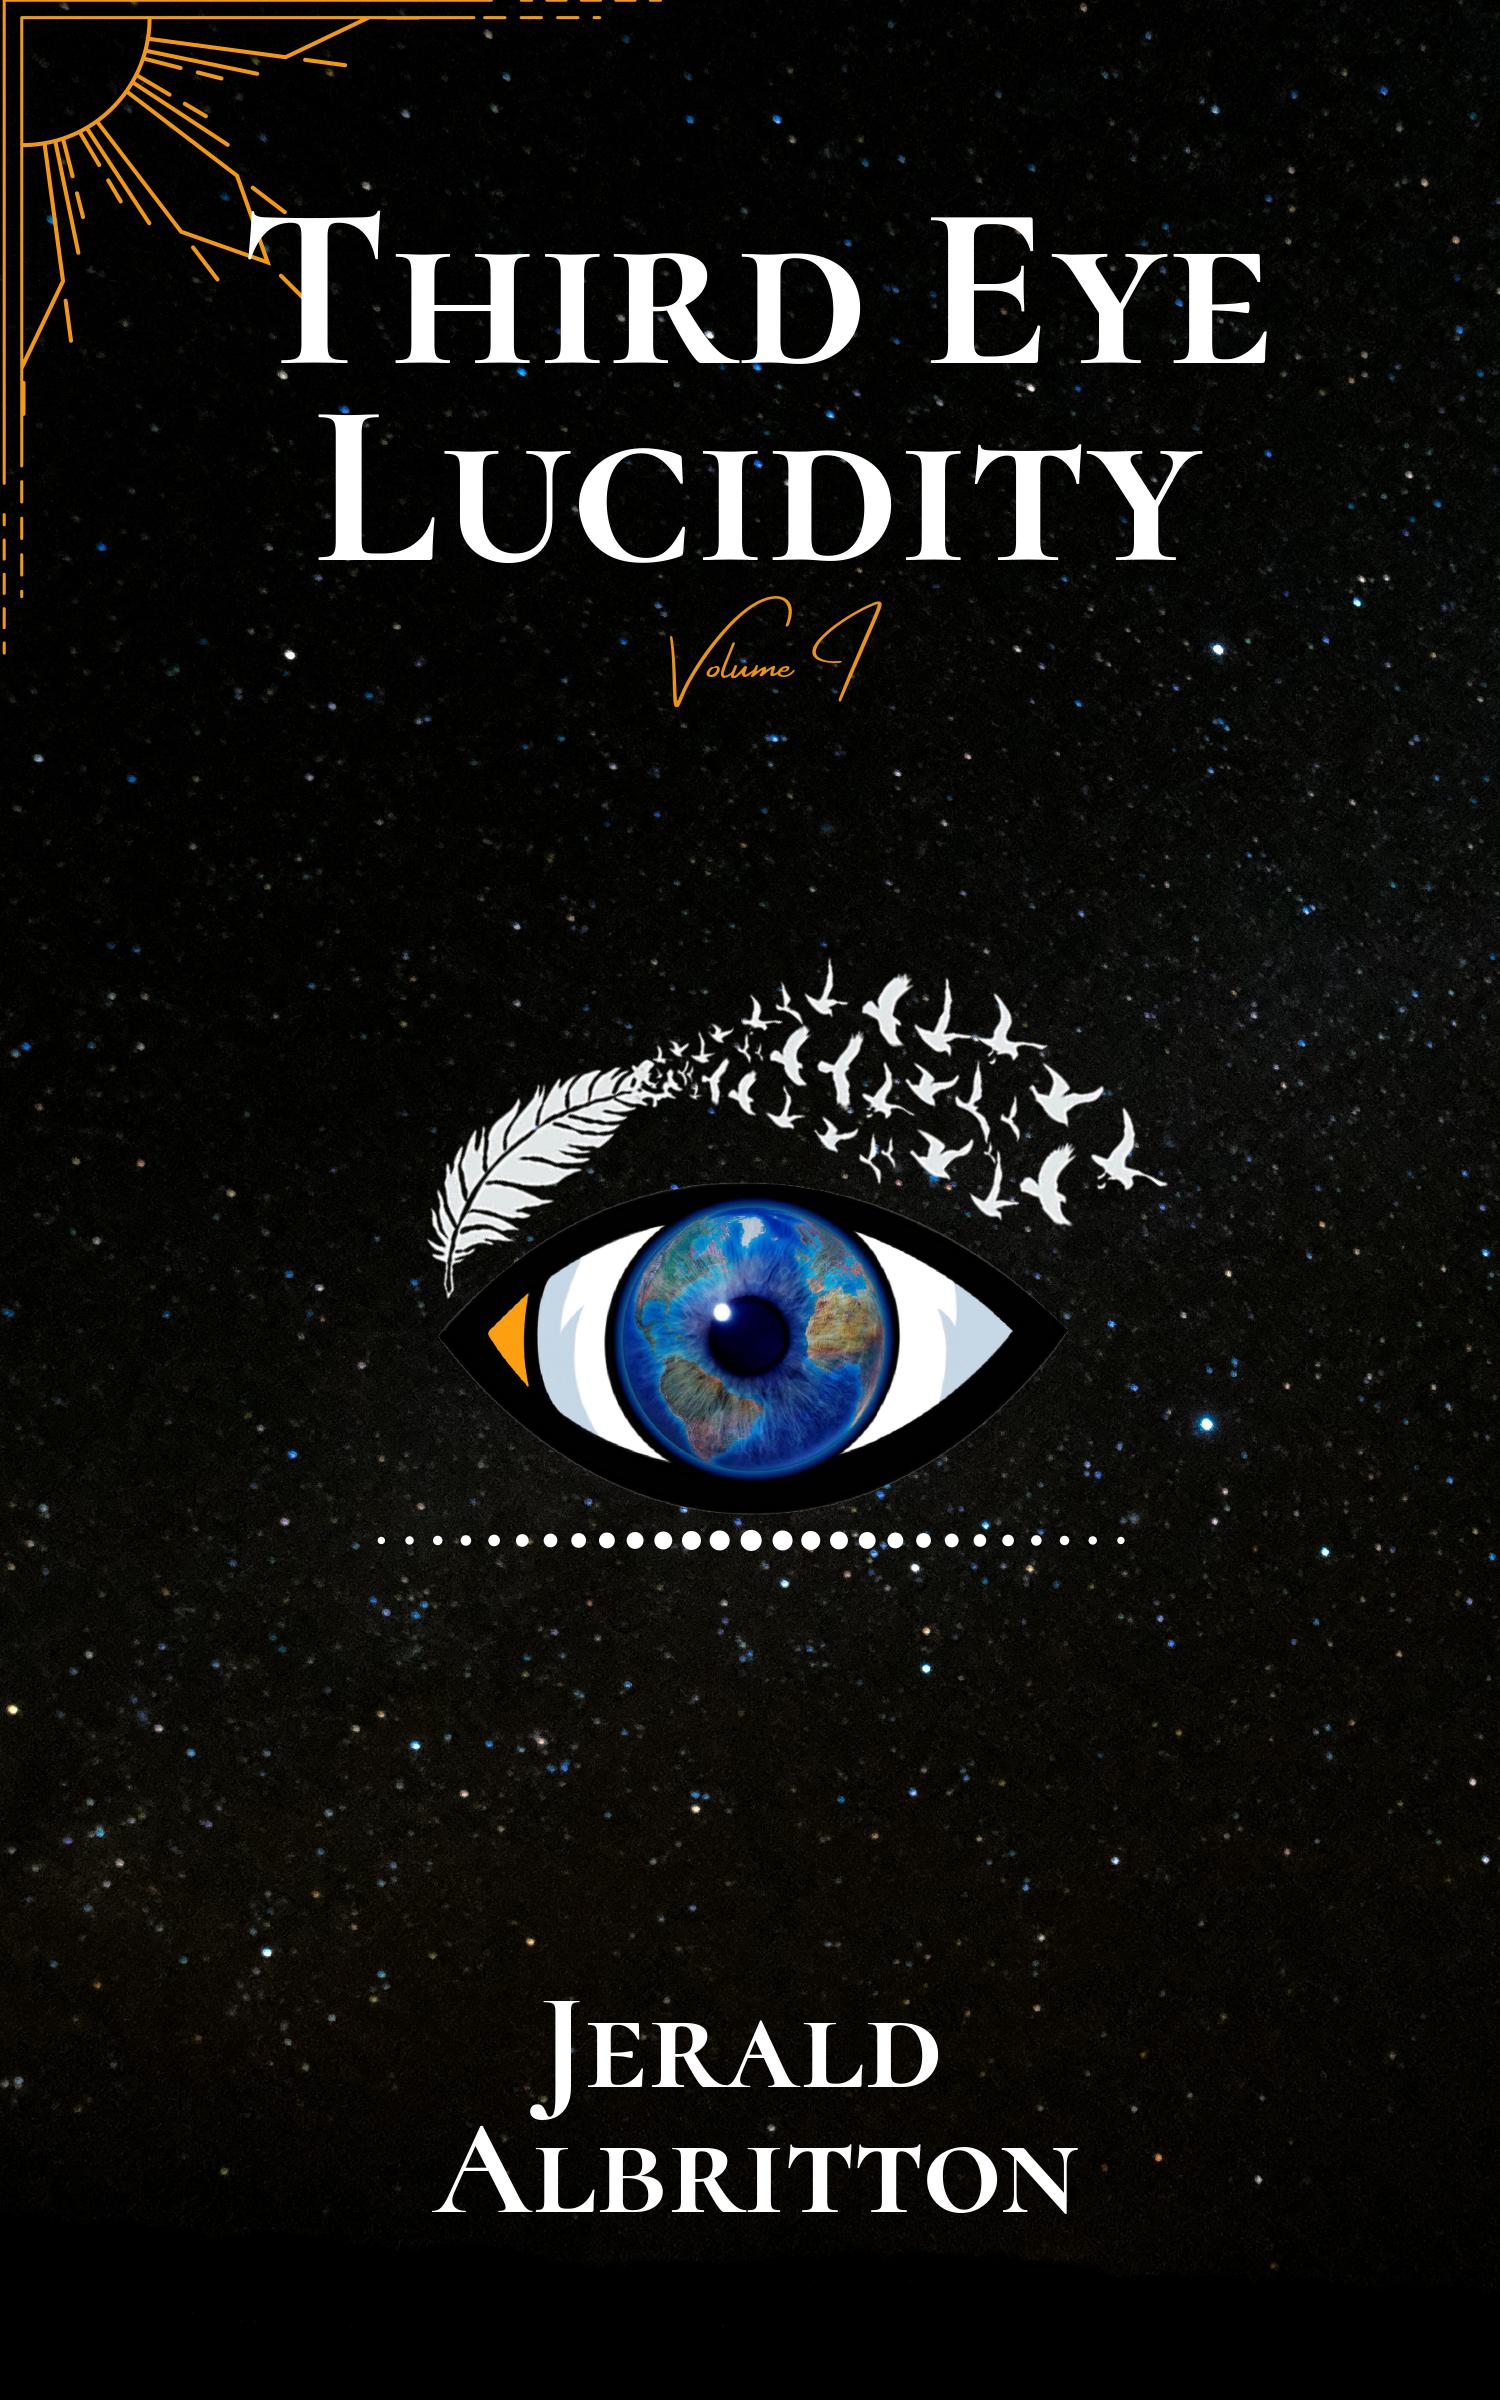 FREE: Third Eye Lucidity by Jerald Albritton